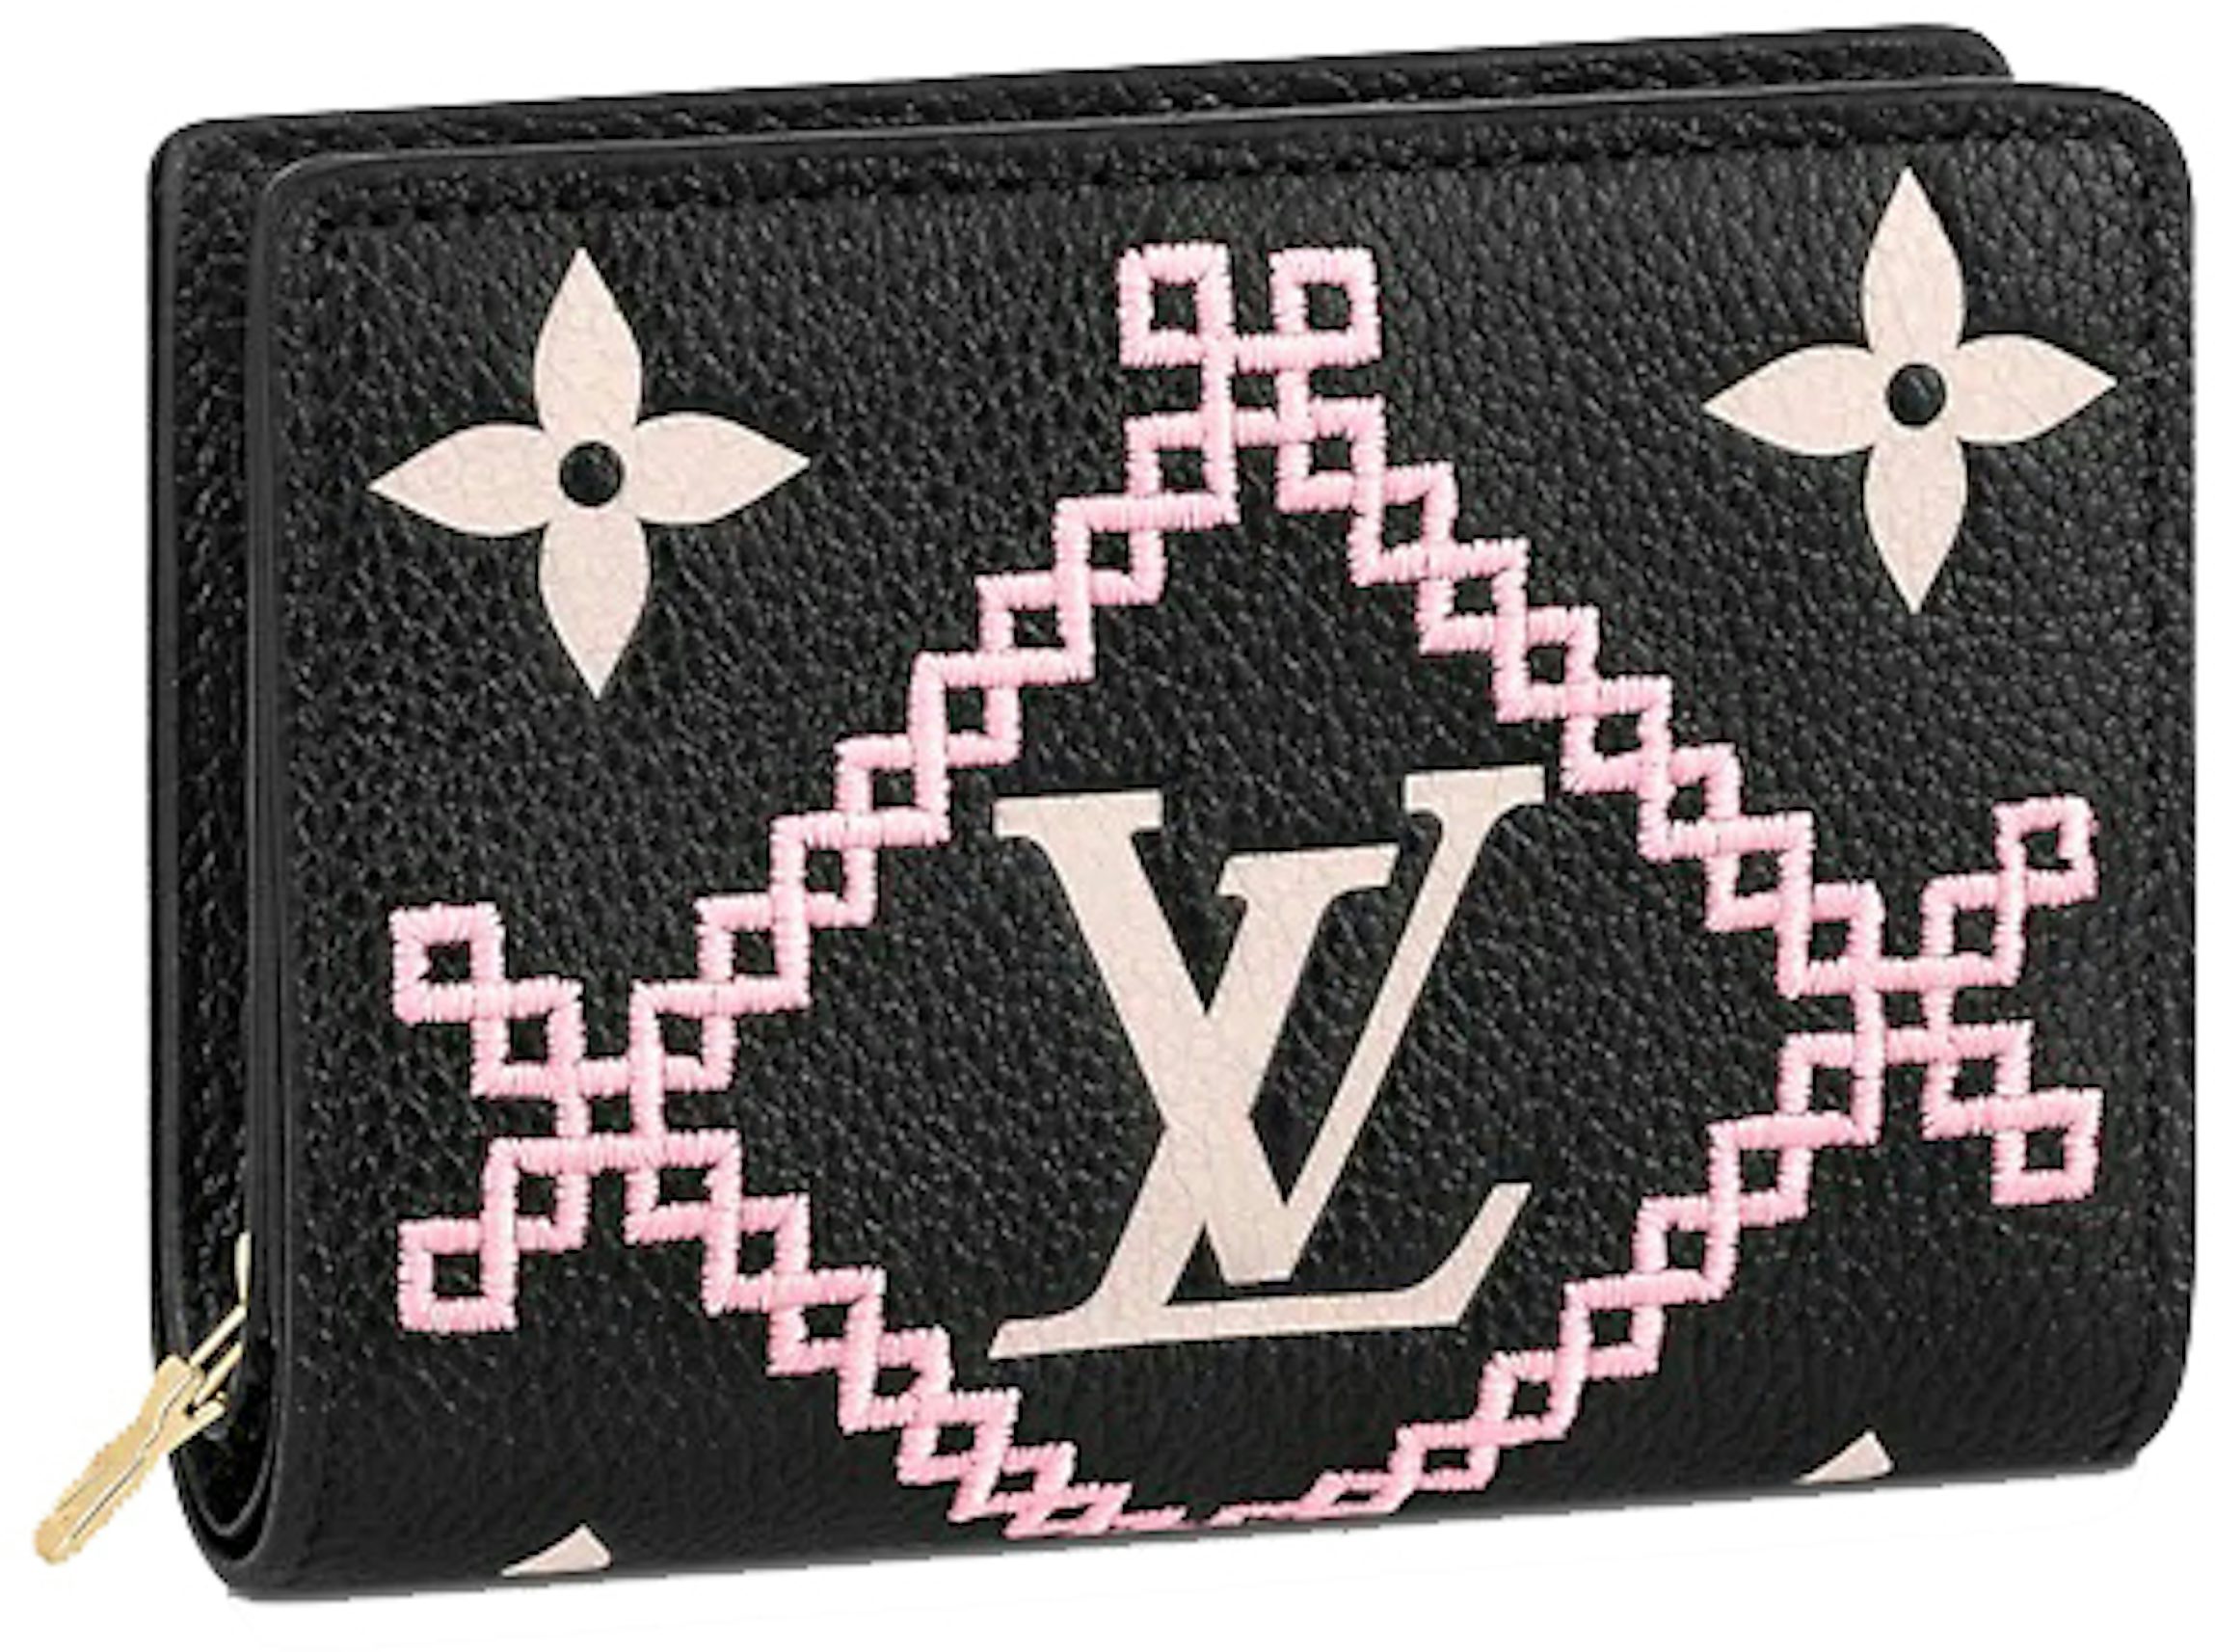 Authenticity Check on StockX bought wallet : r/Louisvuitton